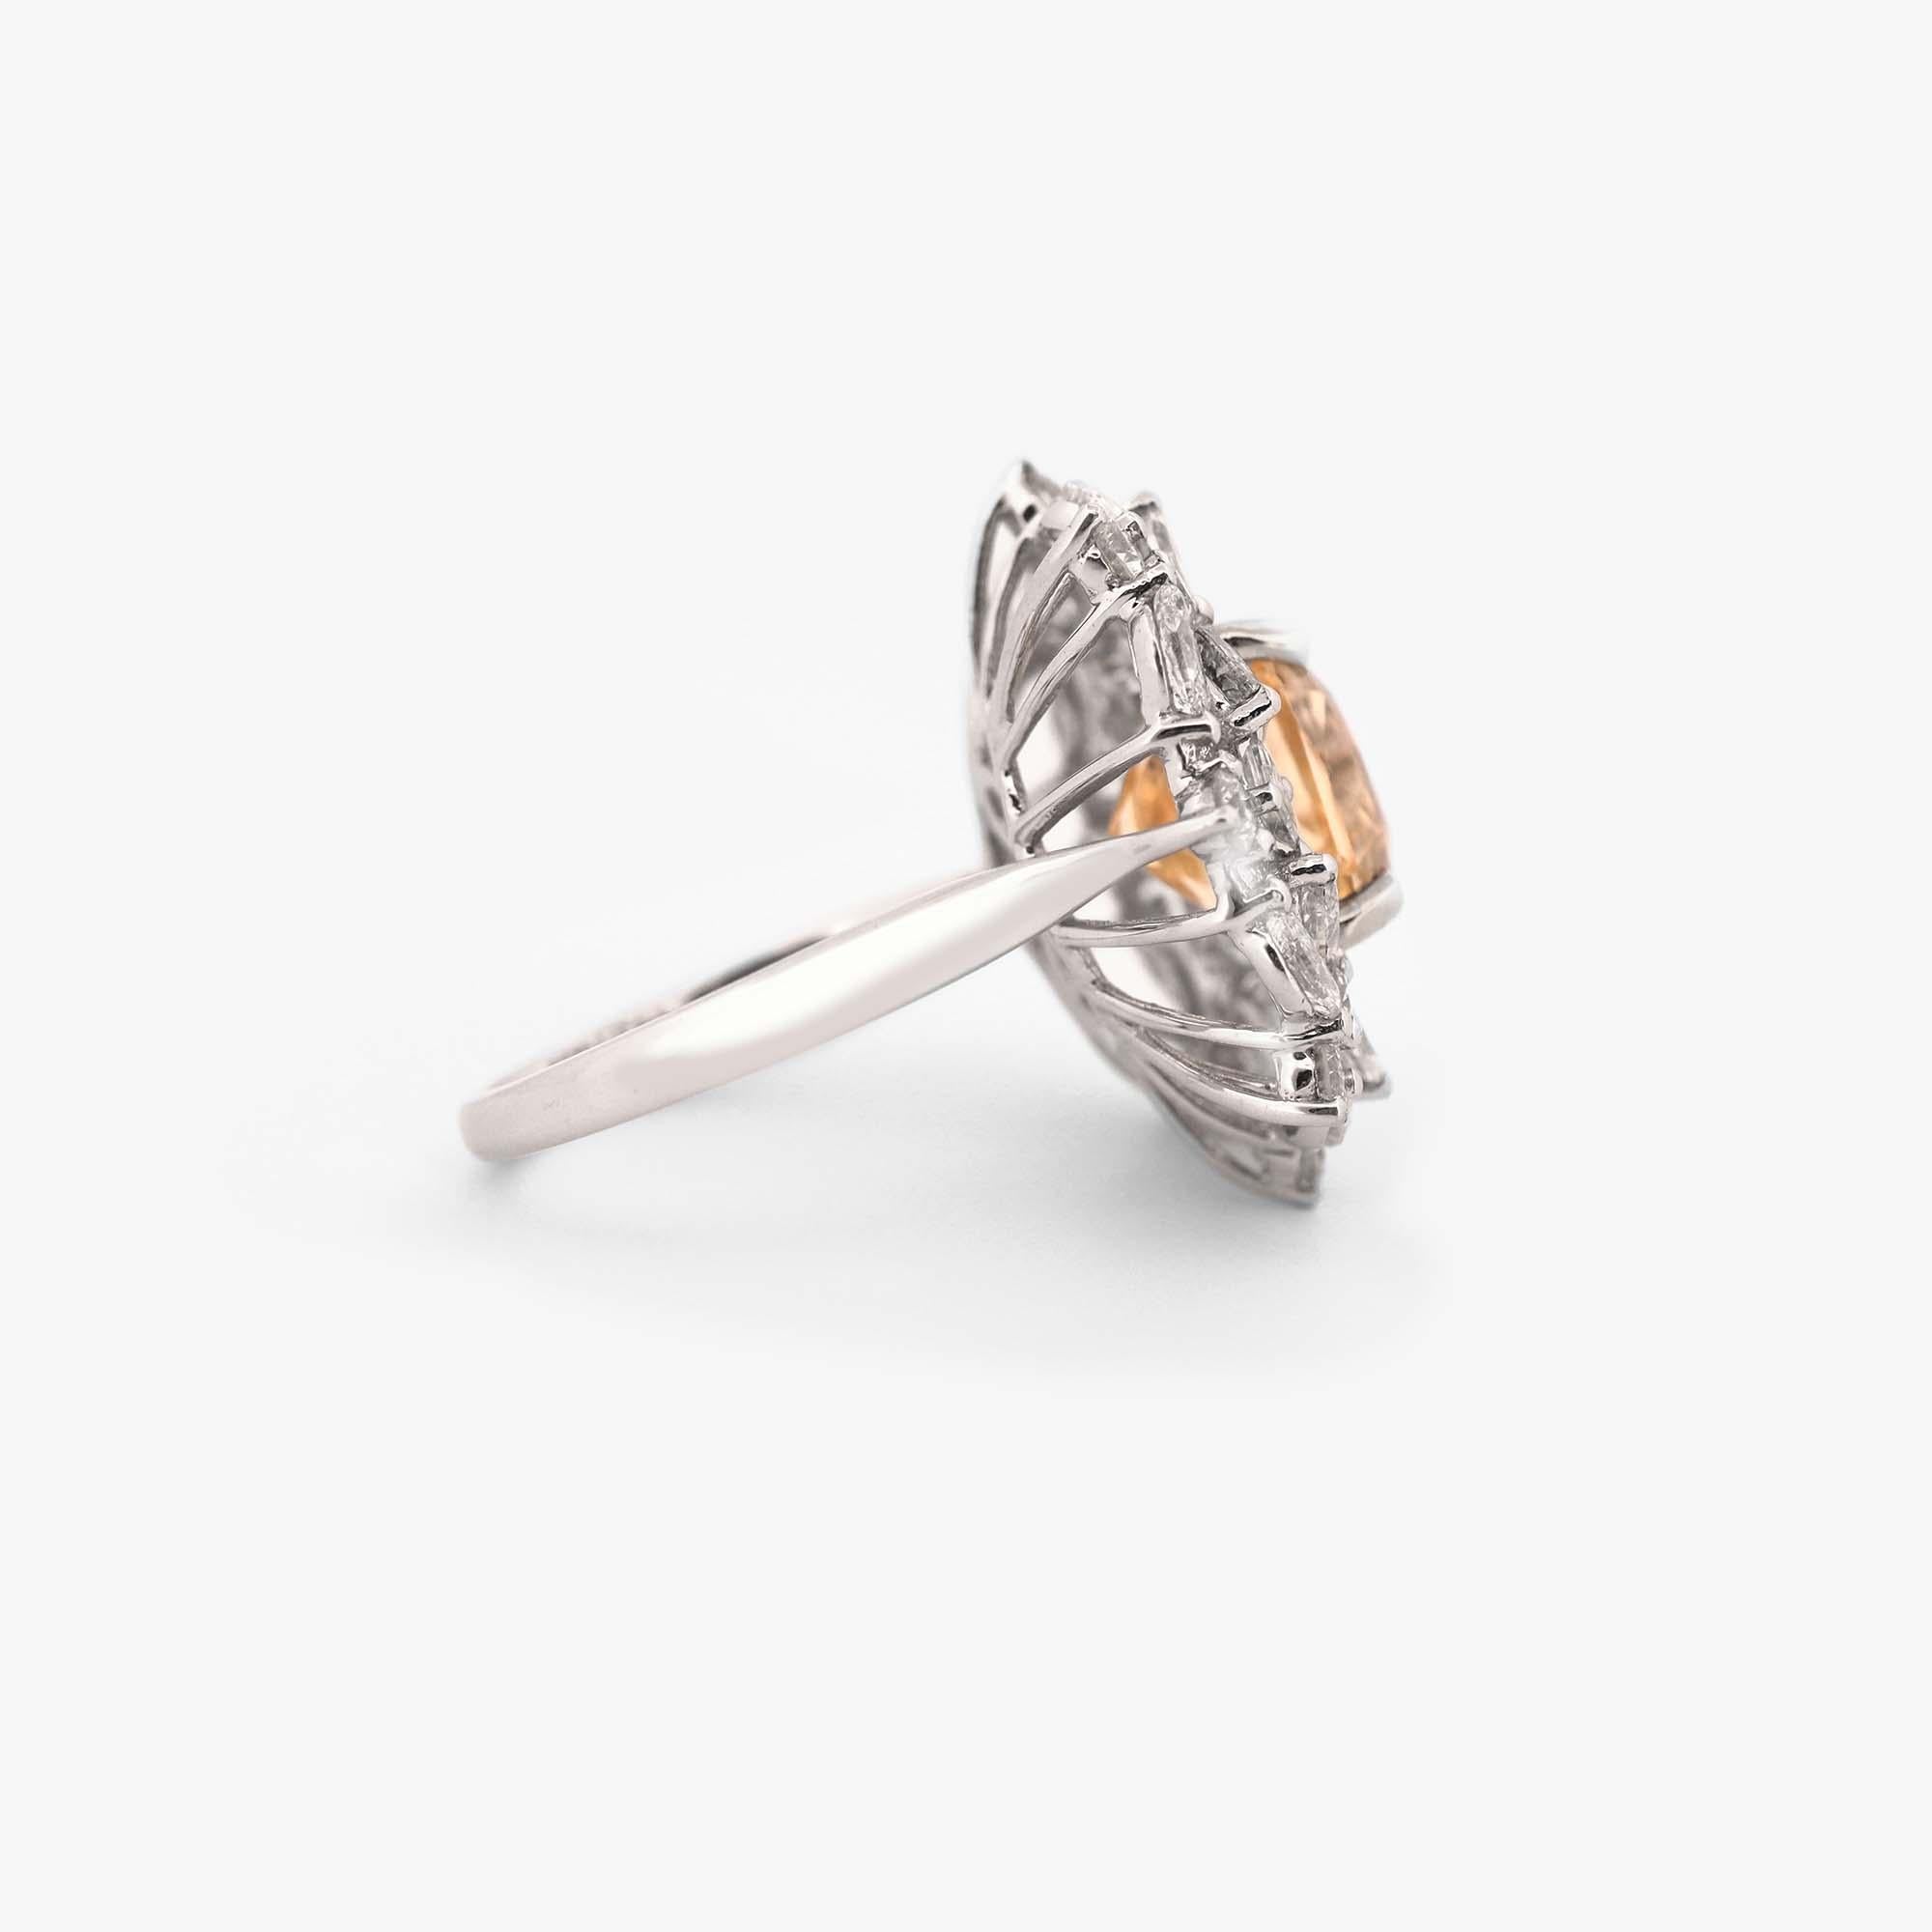 This breathtaking cocktail ring will capture the attention of everyone in the room. This stunning piece features a GIA certified 5.59 carat yellow sapphire, beautifully showcased in a elegant and stylish setting. The sapphire's vibrant and cheerful